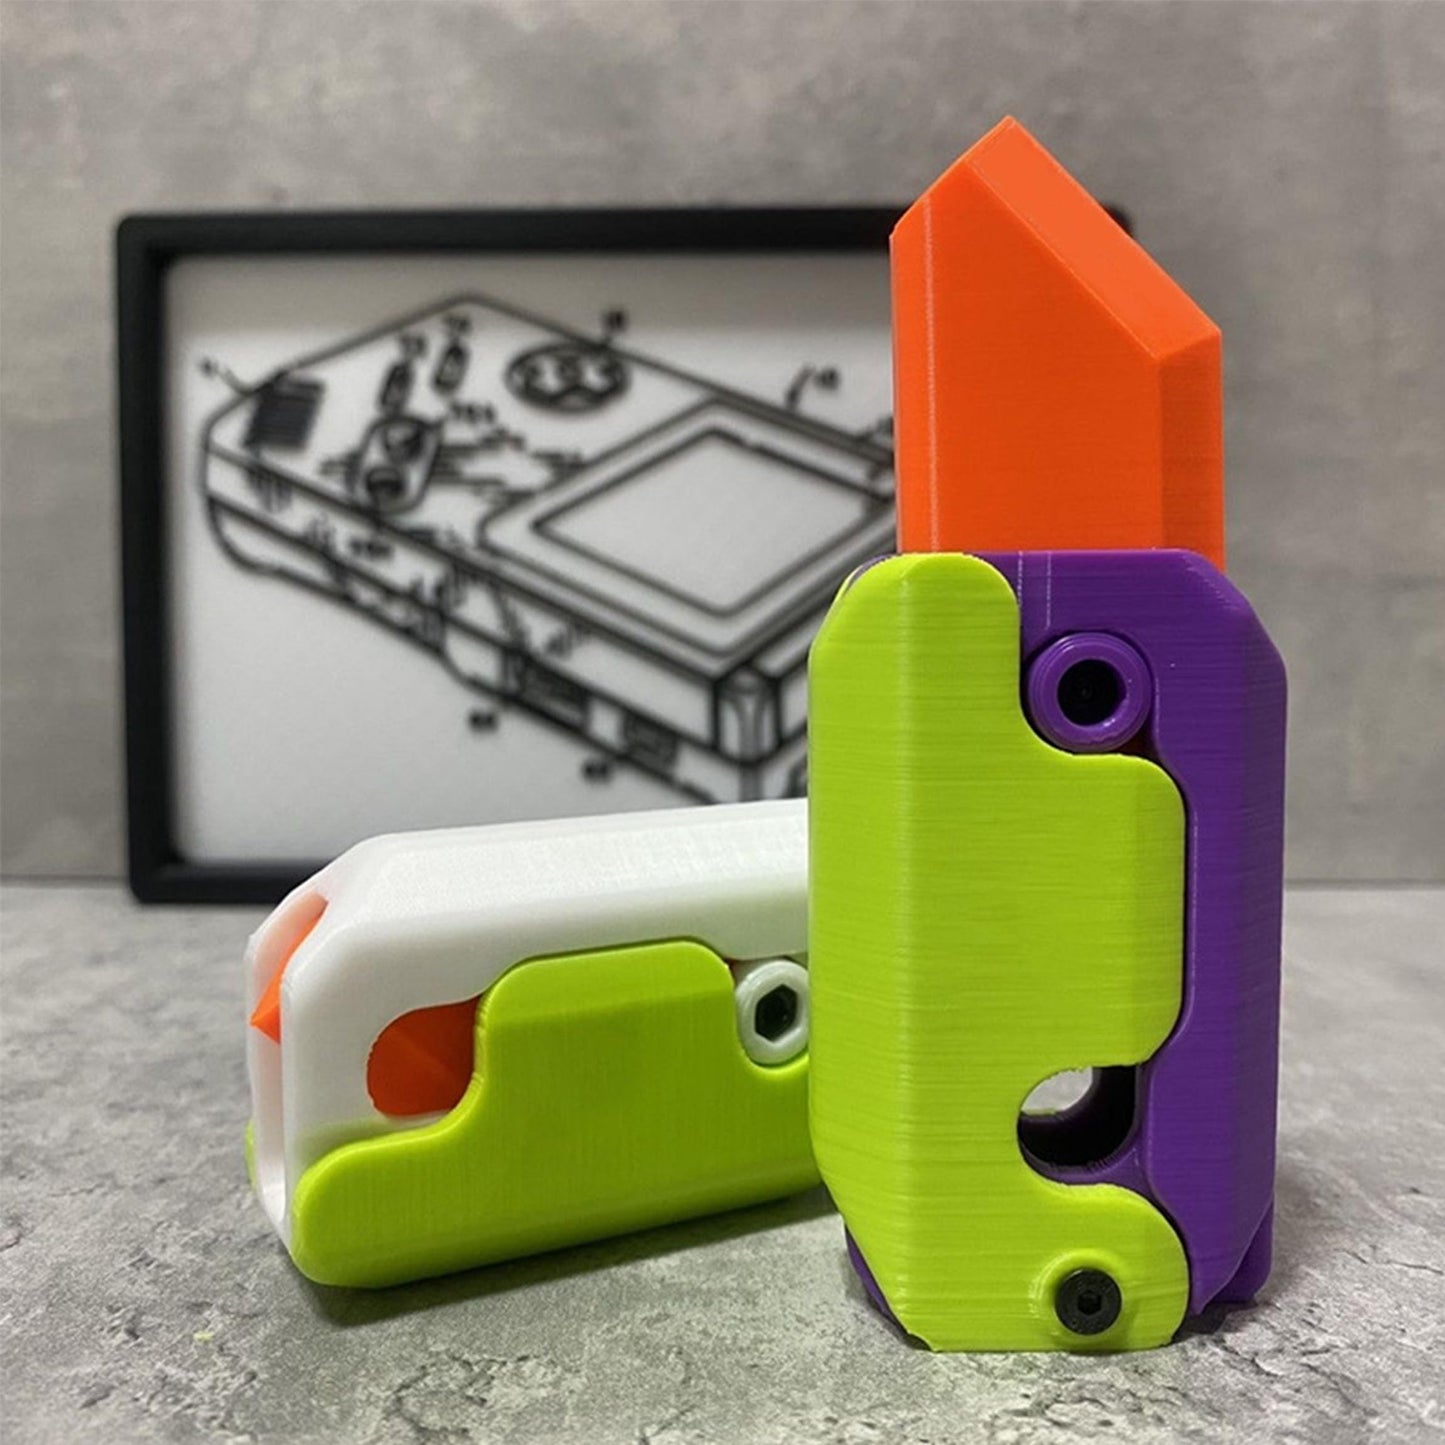 3D Print Carrot Knife Toy Gift(No Blade)